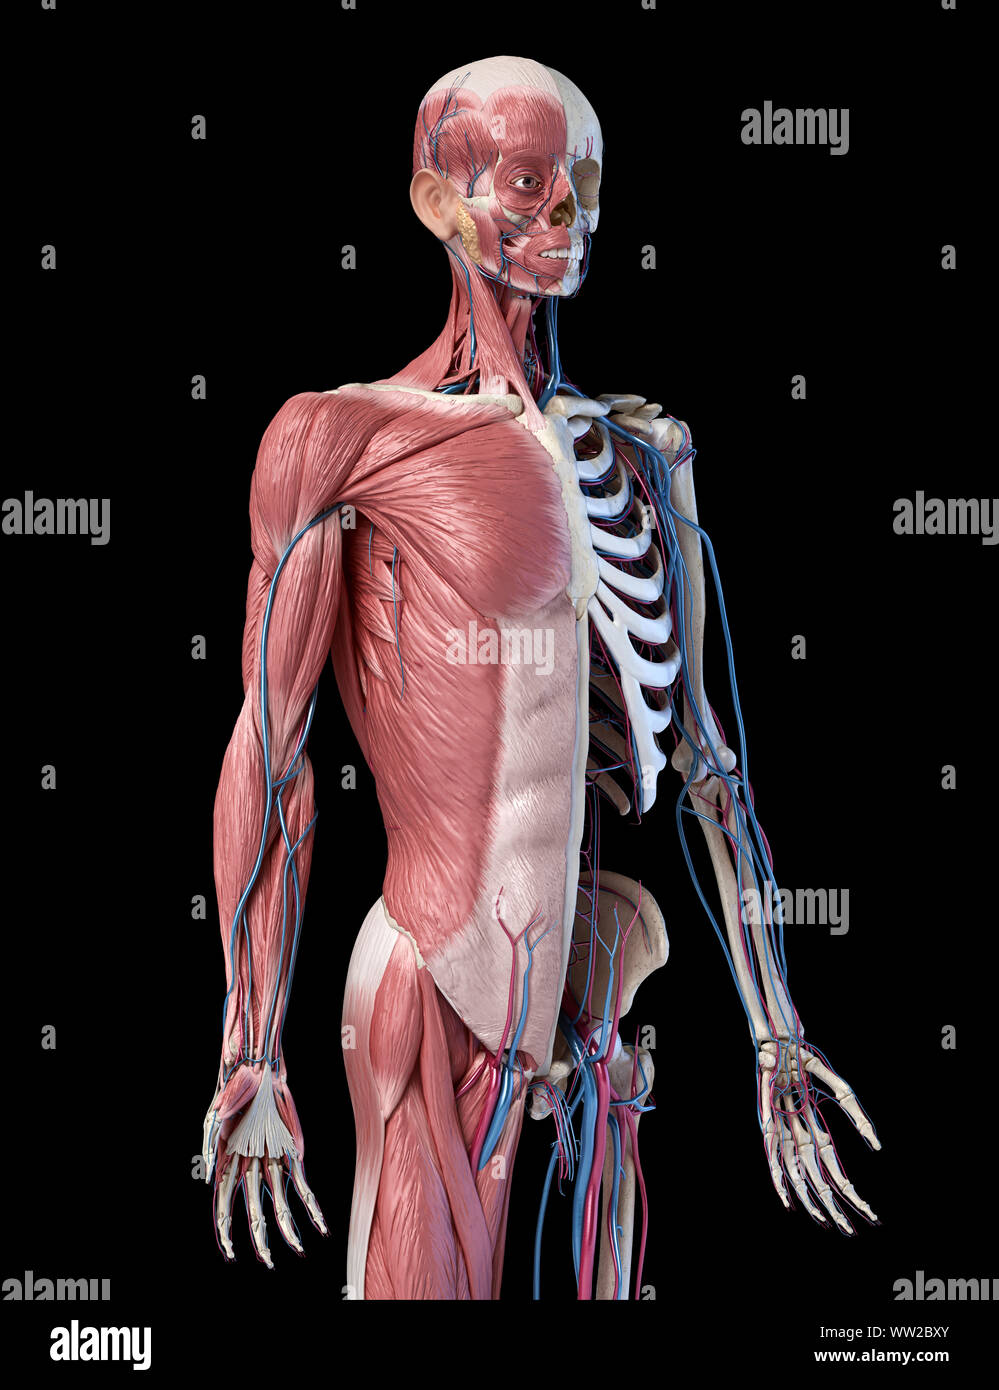 Human Anatomy 3/4 body skeletal, muscular and cardiovascular systems. Perspective view from the front, on black background. 3d Illustration Stock Photo